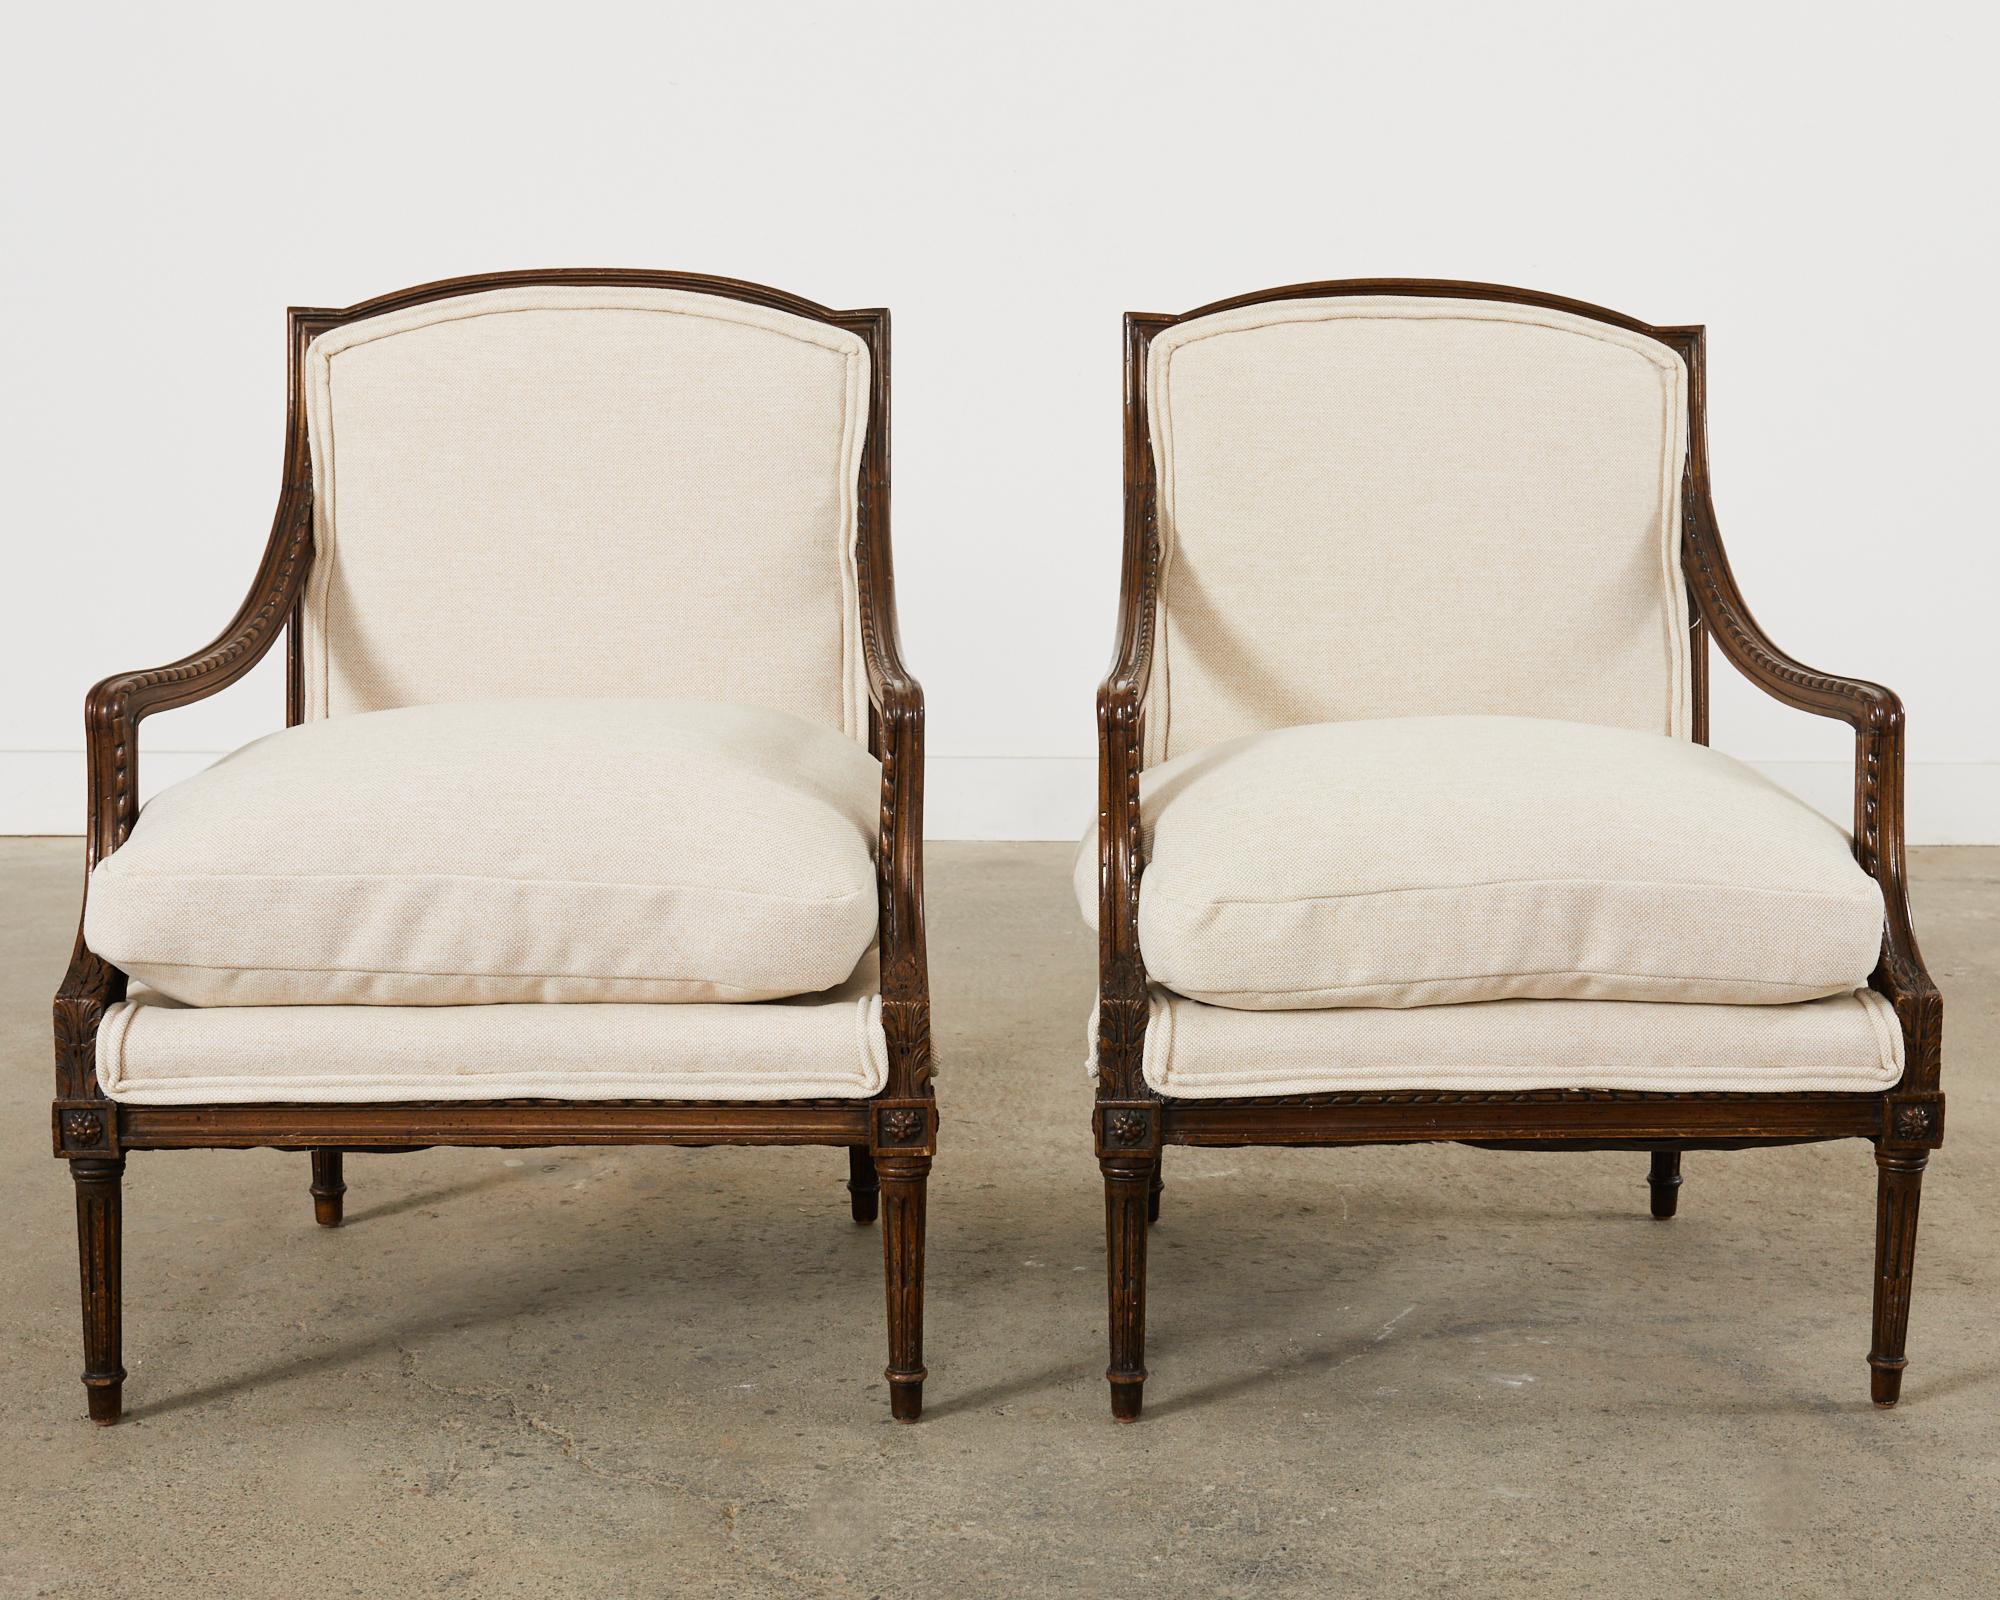 Pair of French Louis XVI Style Walnut Armchairs In Good Condition For Sale In Rio Vista, CA